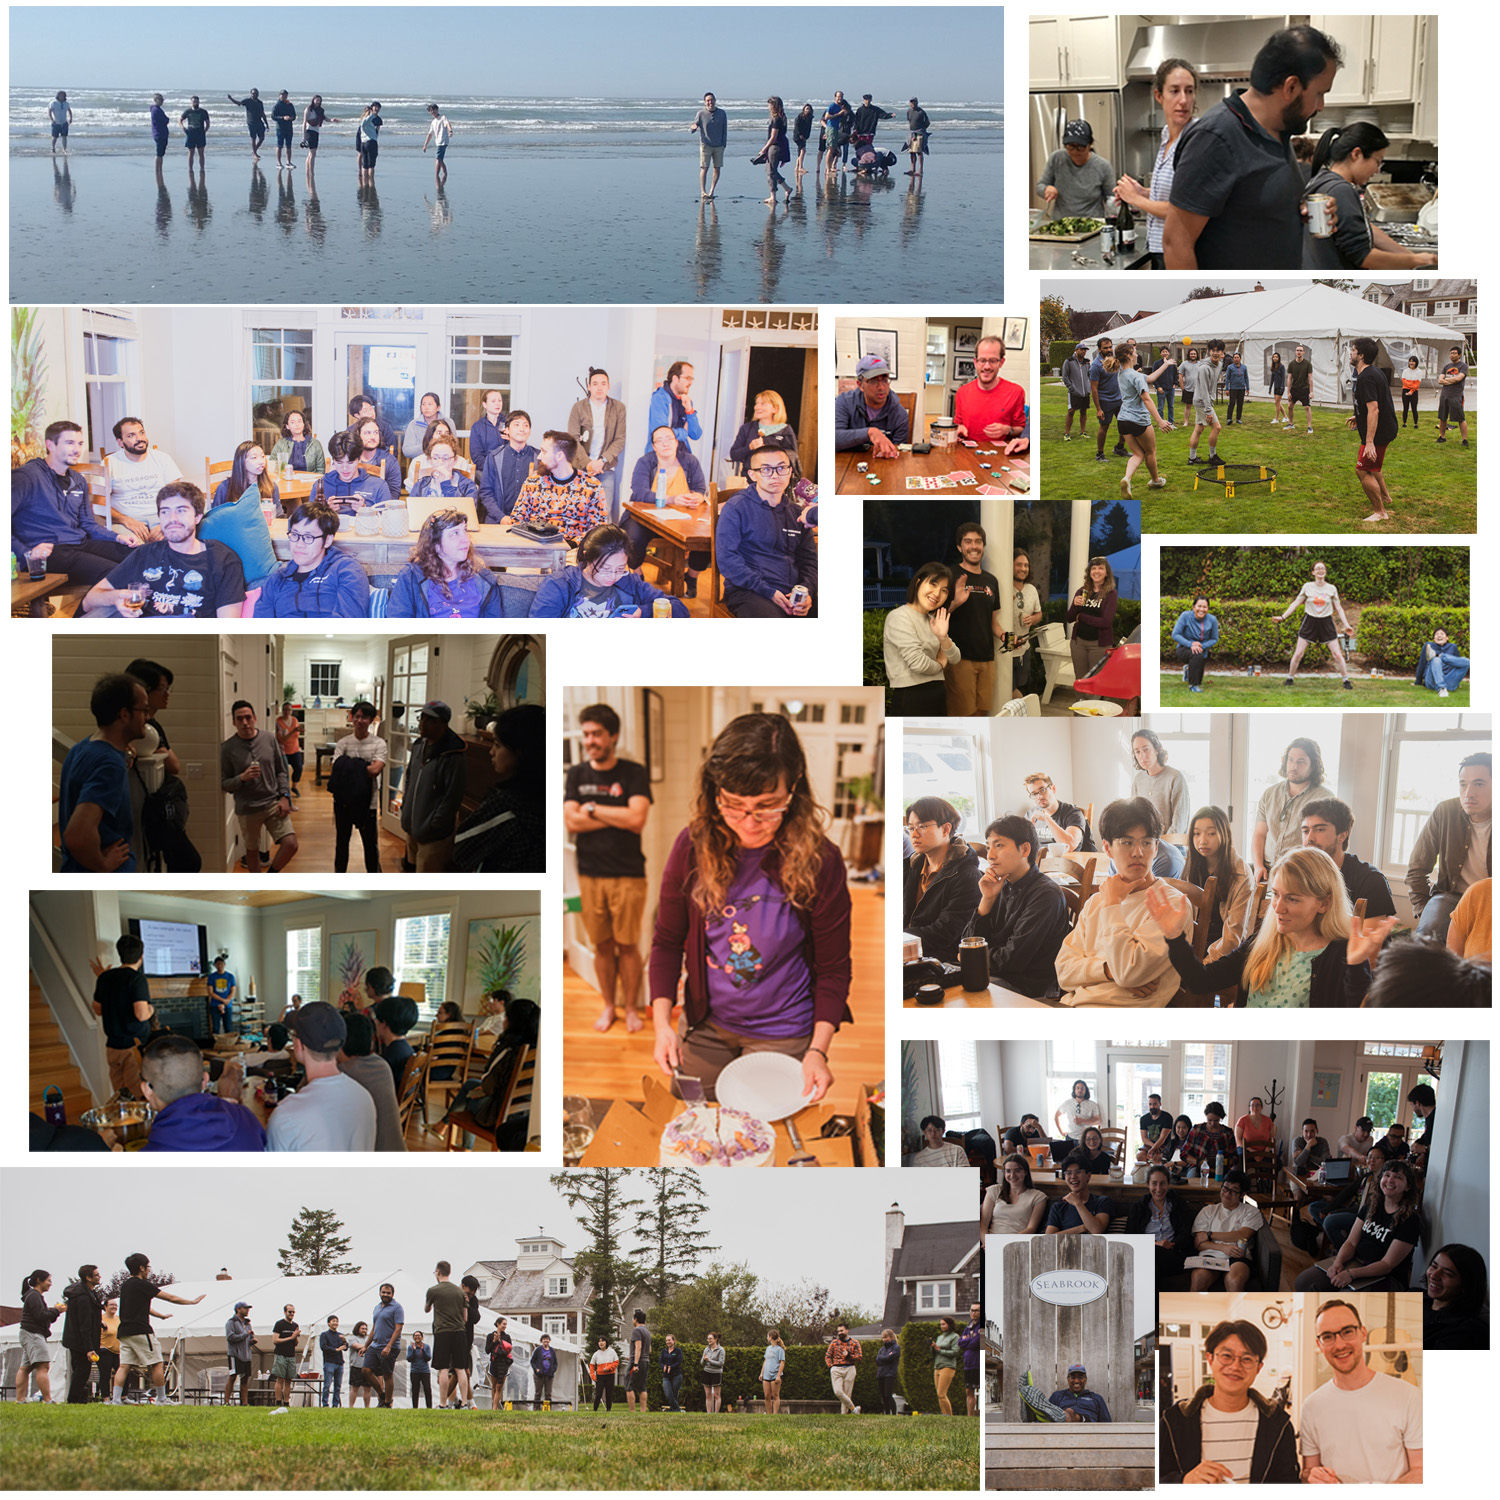 Shendure Lab 2022 Retreat (Seabrook, photos by Will Chen, et all)